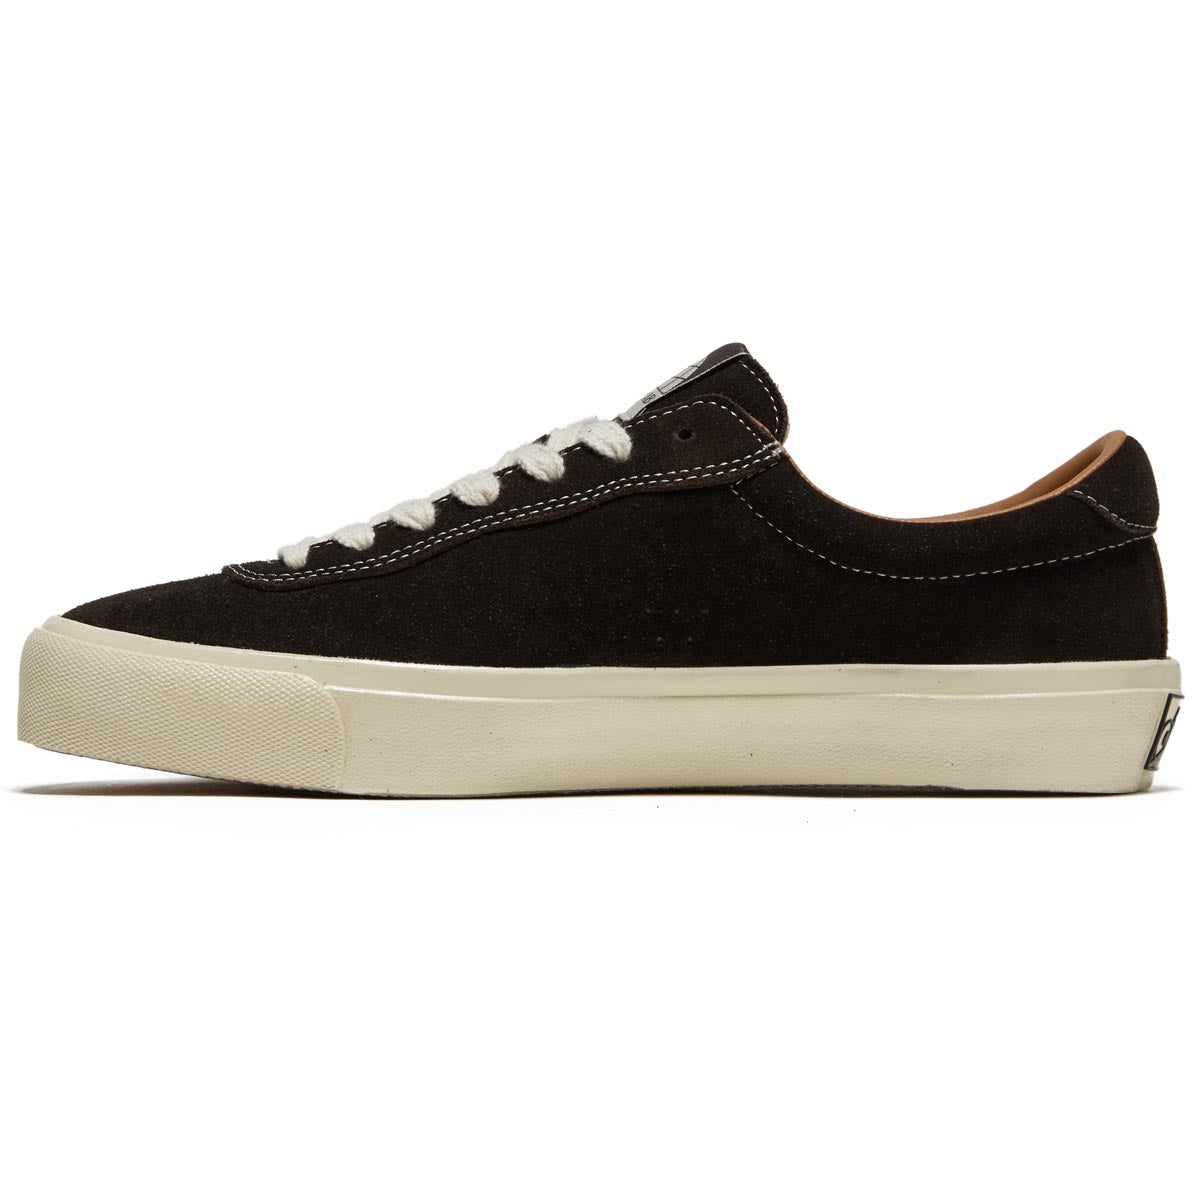 Last Resort AB VM001 Suede Lo Shoes - Coffee Bean/White image 2